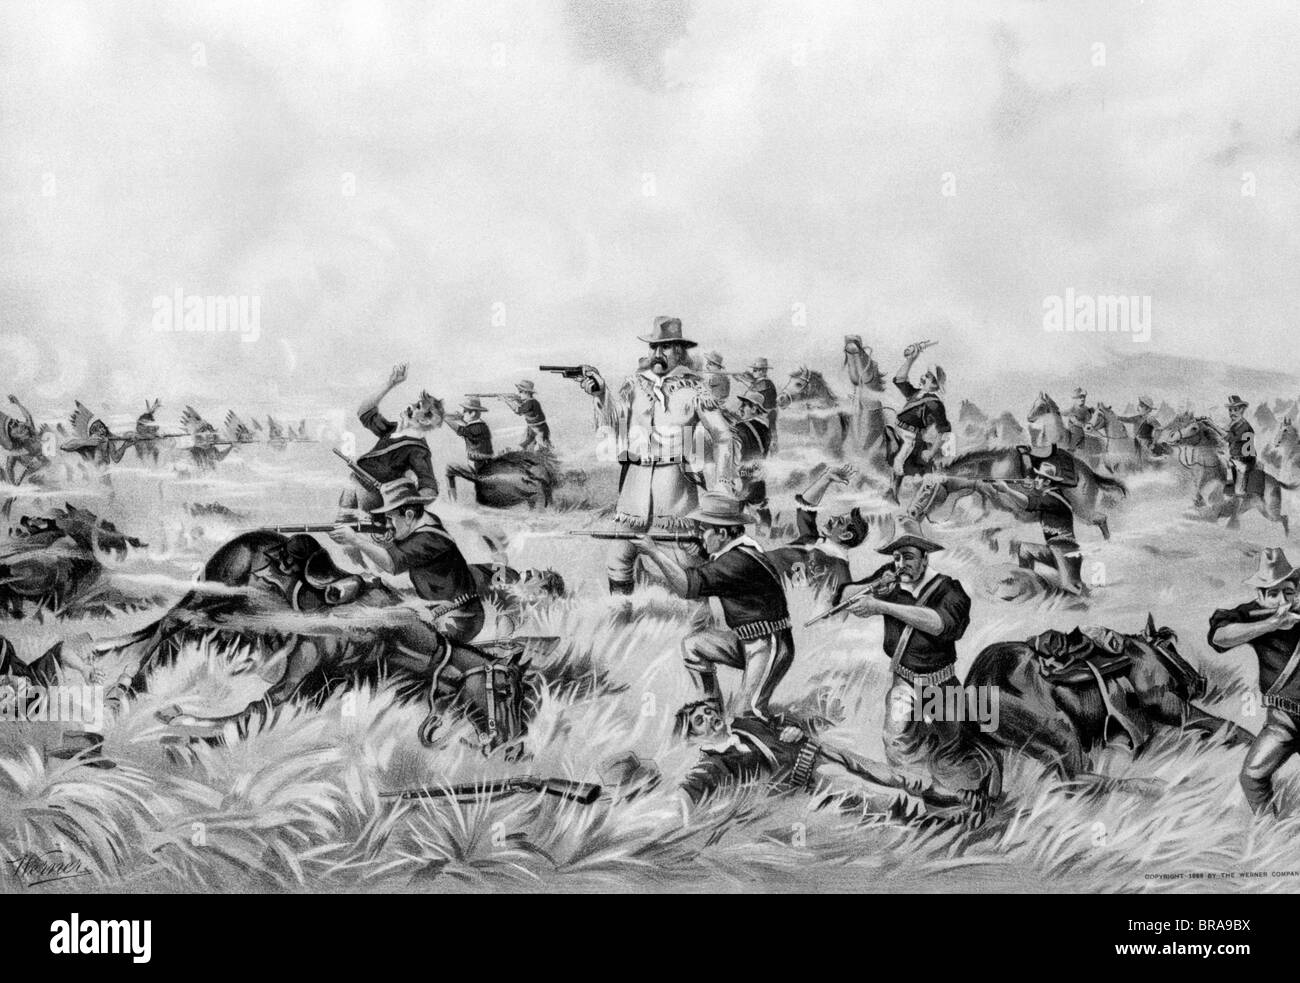 1800s 1870s JUNE 25 1876 GENERAL GEORGE ARMSTRONG CUSTER'S LAST STAND AT BATTLE OF LITTLE BIG HORN Stock Photo